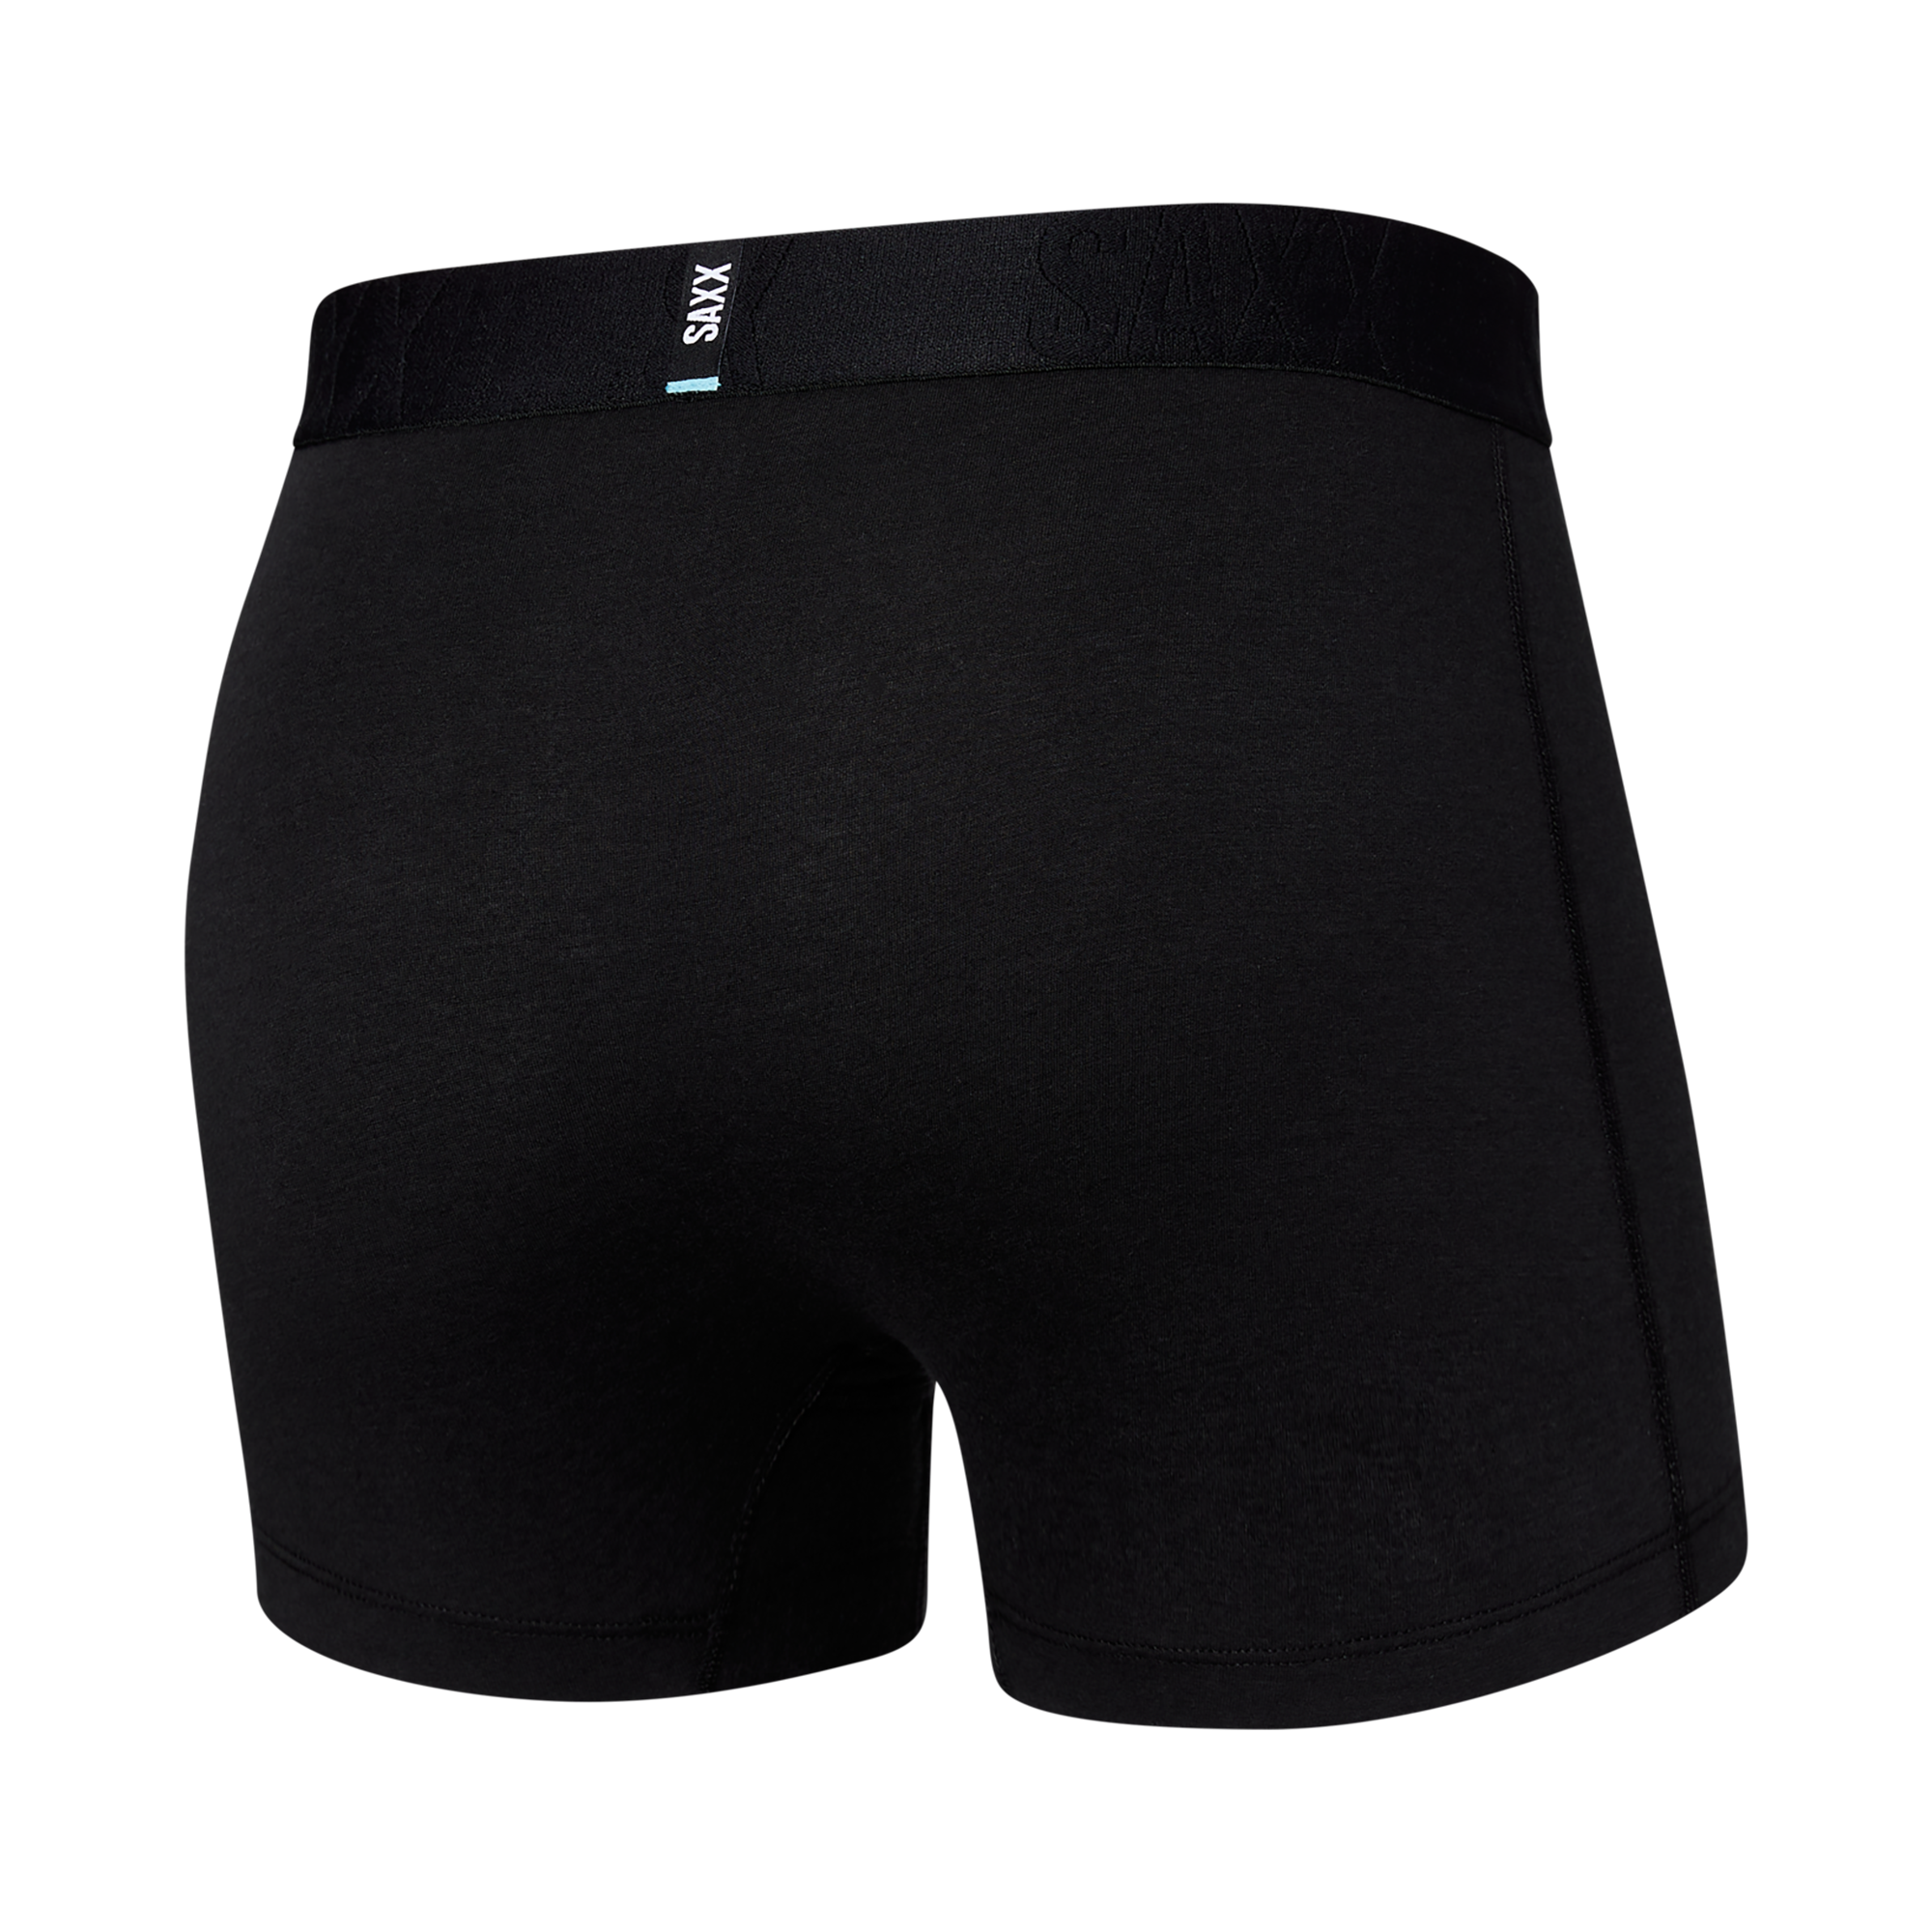 Back of DropTemp Cooling Cotton Trunk in Black